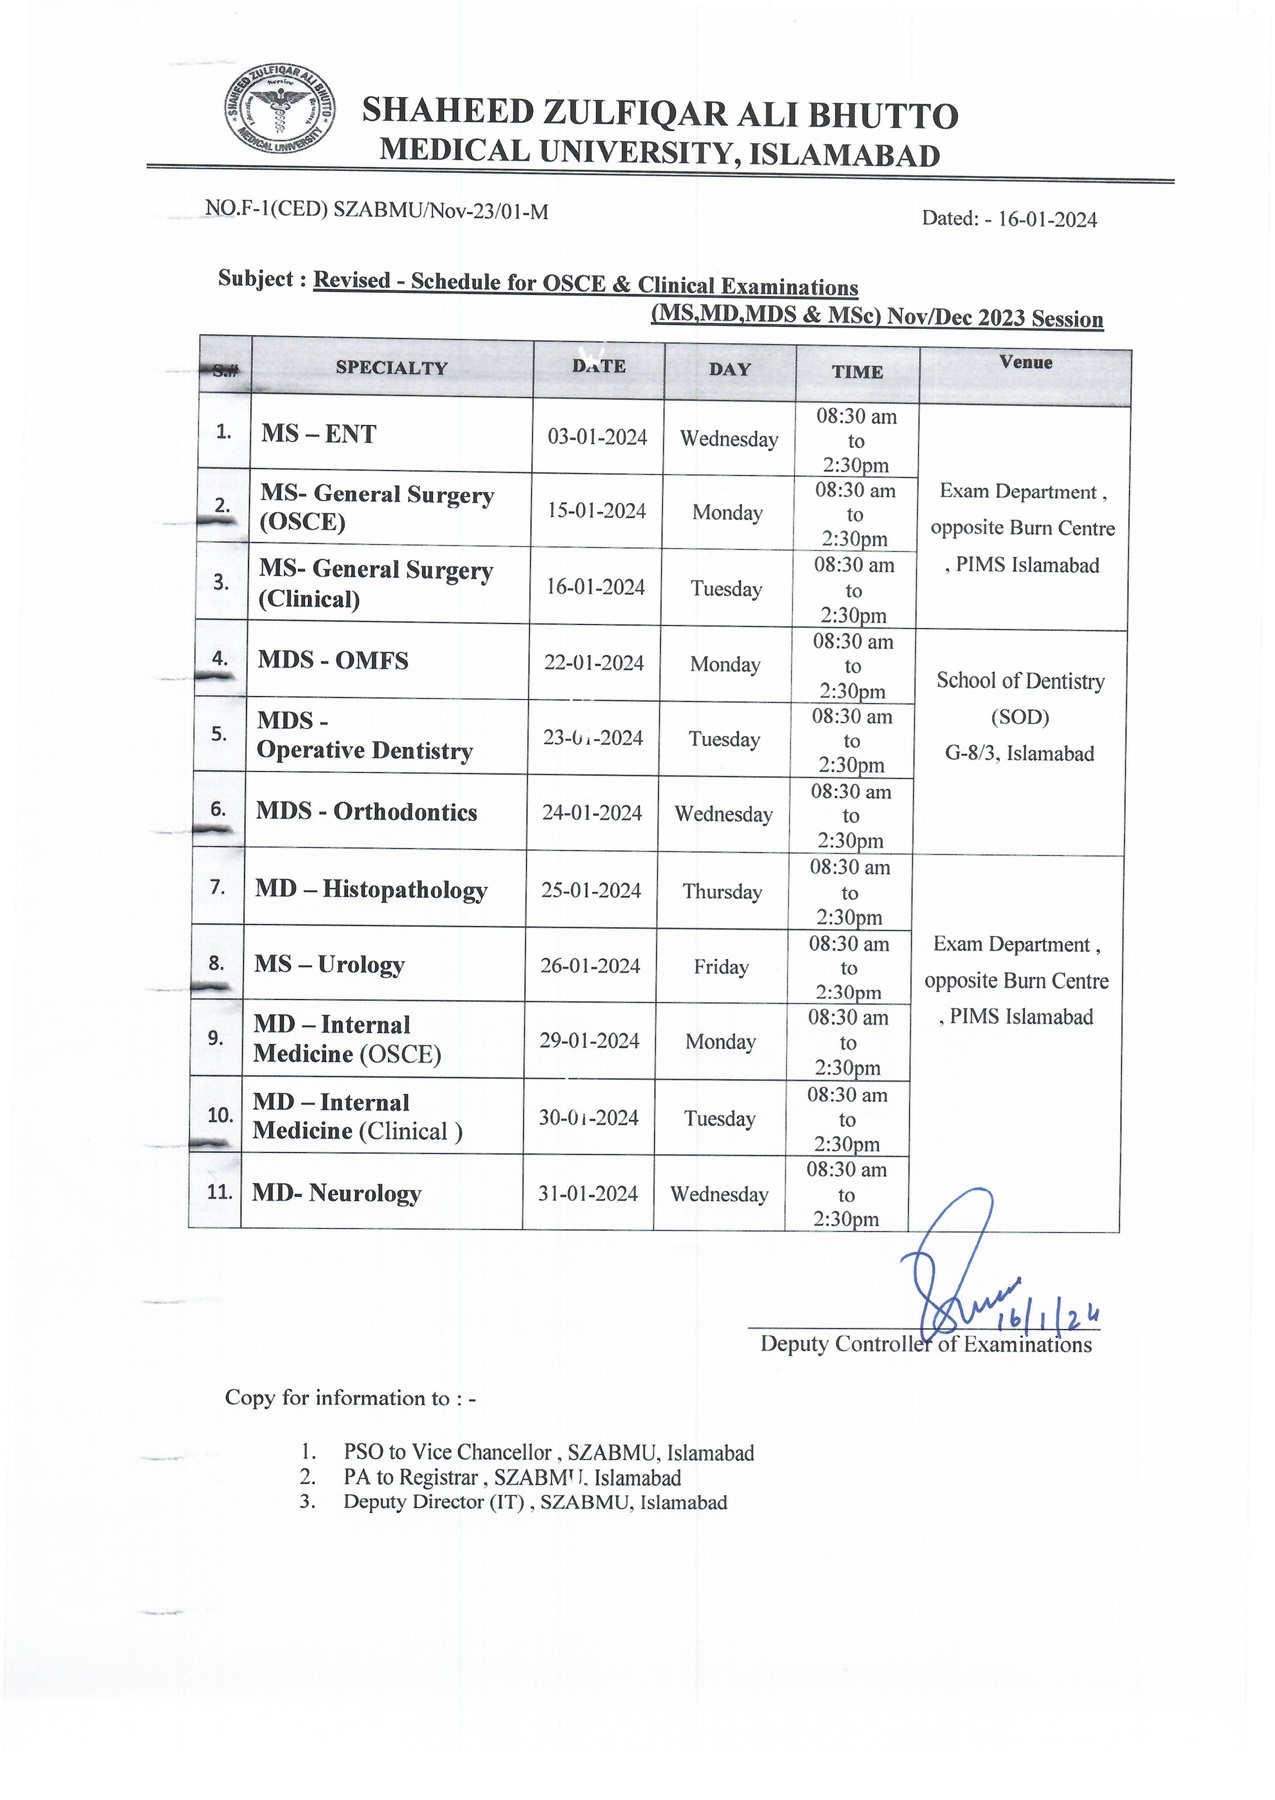 Revised schedule of OSCE and Clinical Exam (MS-MD-MDS -MSc) November/December 2023 session